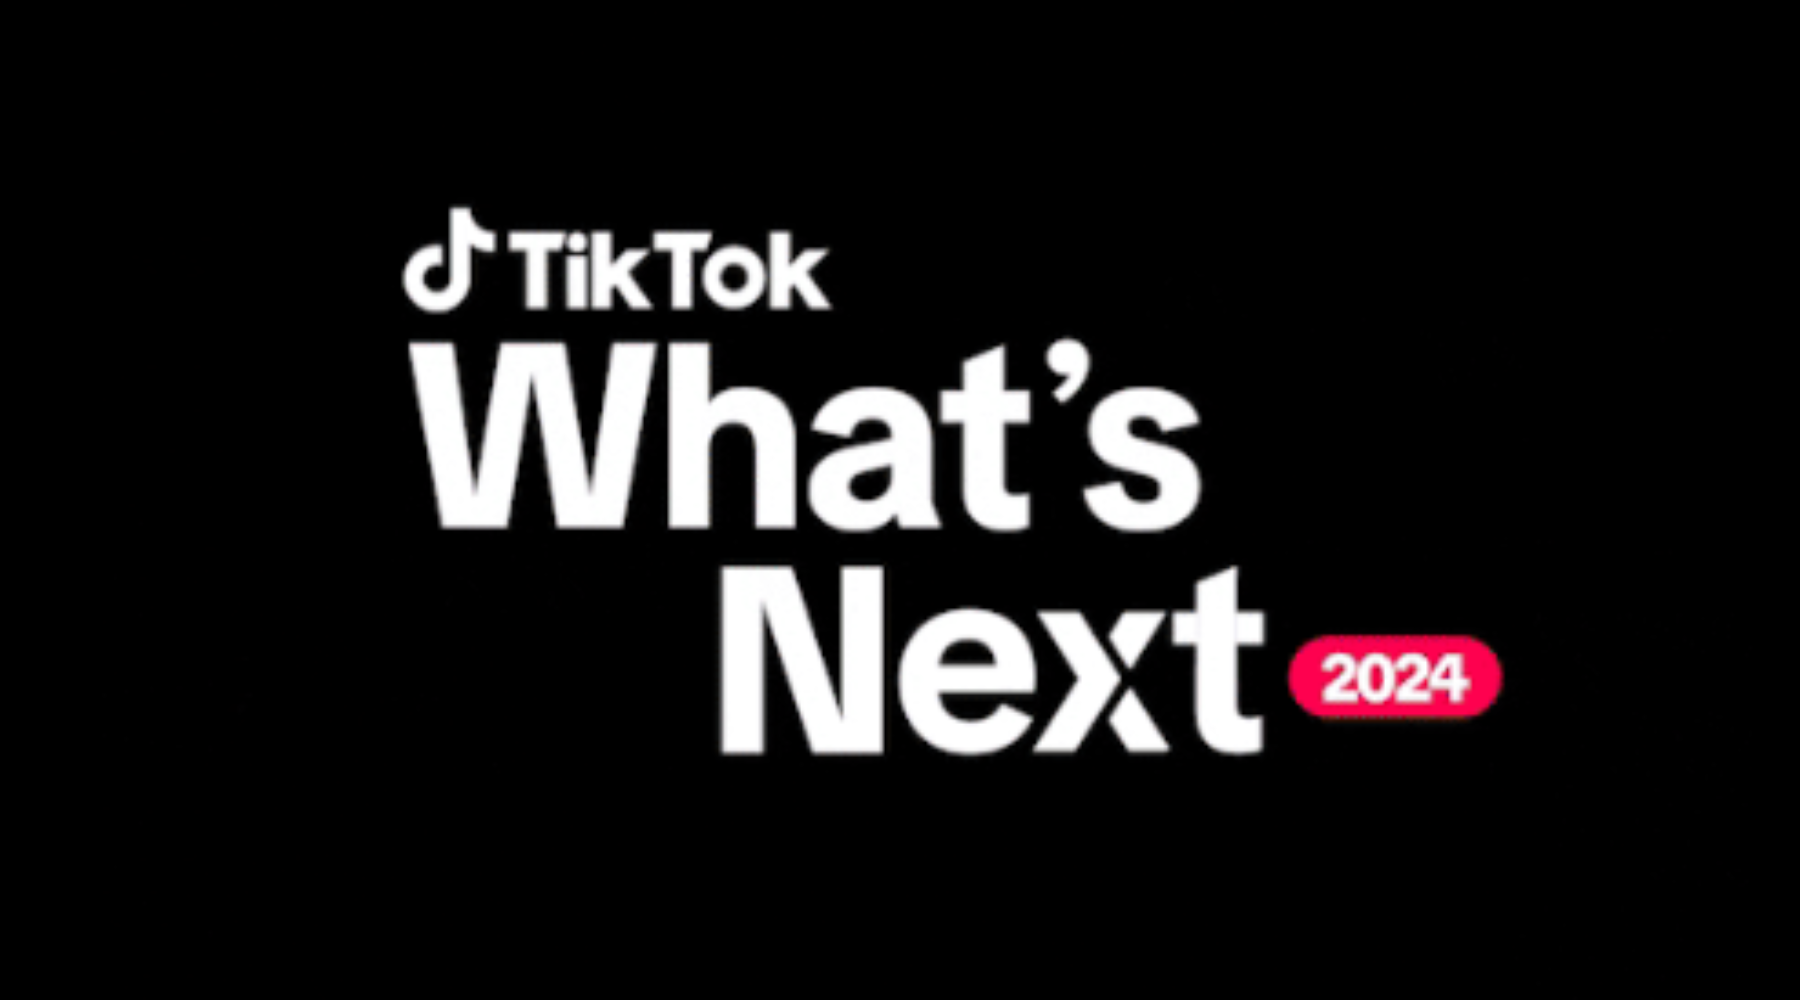 TikTok's What's Next Trend Report Reveals Marketing Insights for 2024 in MENA